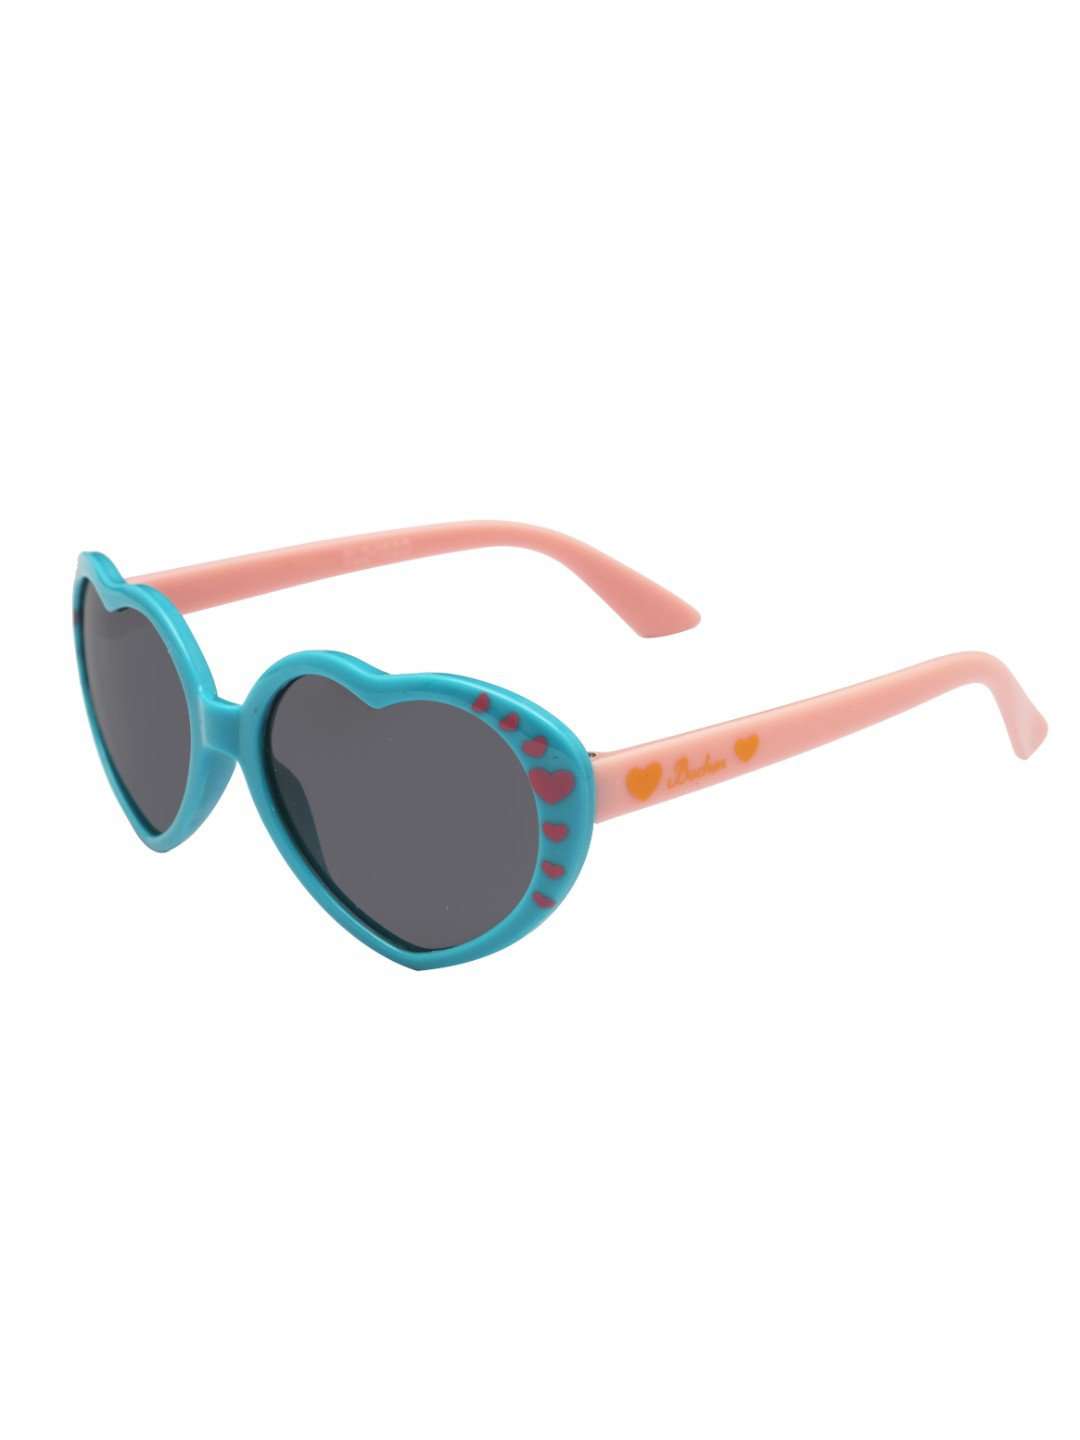 Stol'n Kids Blue and Pink Heart Sunglasses - SWHF